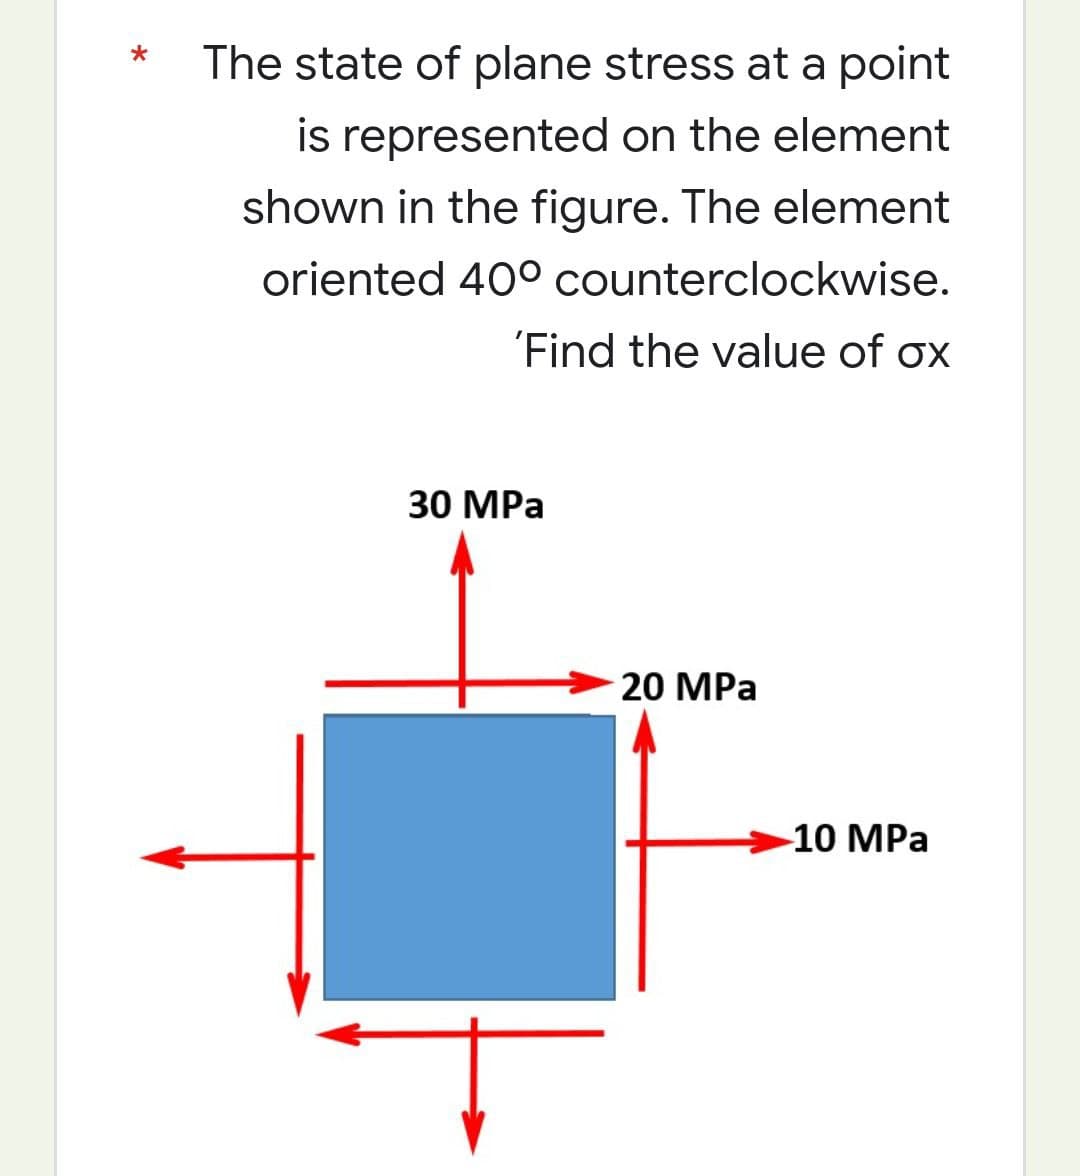 *
The state of plane stress at a point
is represented on the element
shown in the figure. The element
oriented 40° counterclockwise.
'Find the value of ox
30 MPa
20 MPa
-10 MPa